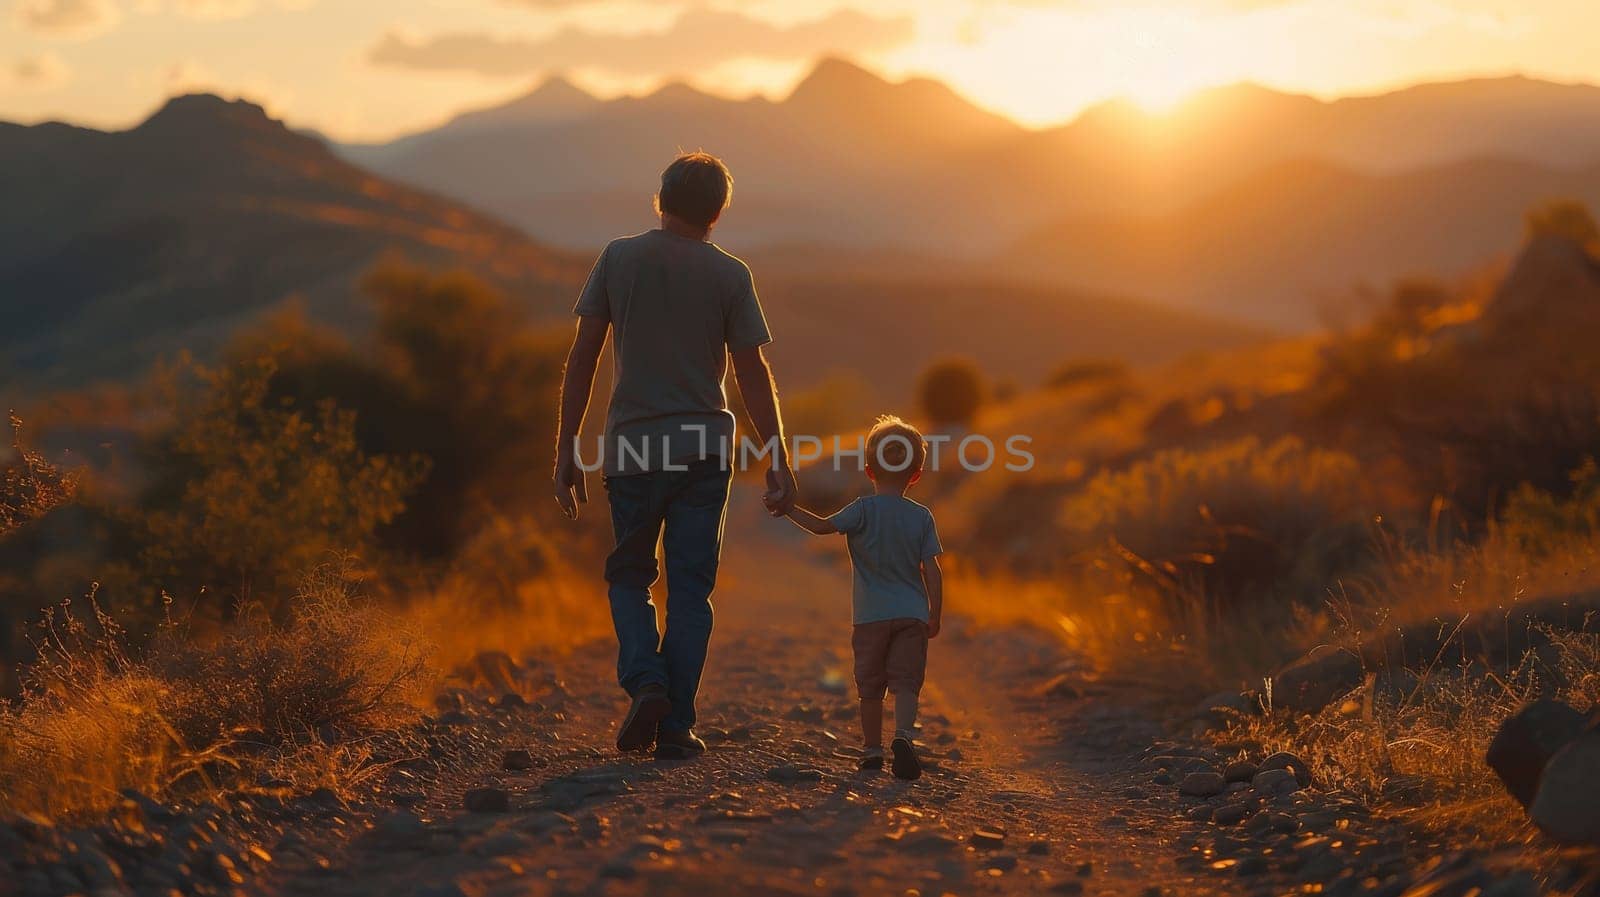 A man and a child are walking together in a desert. The man is holding the child's hand